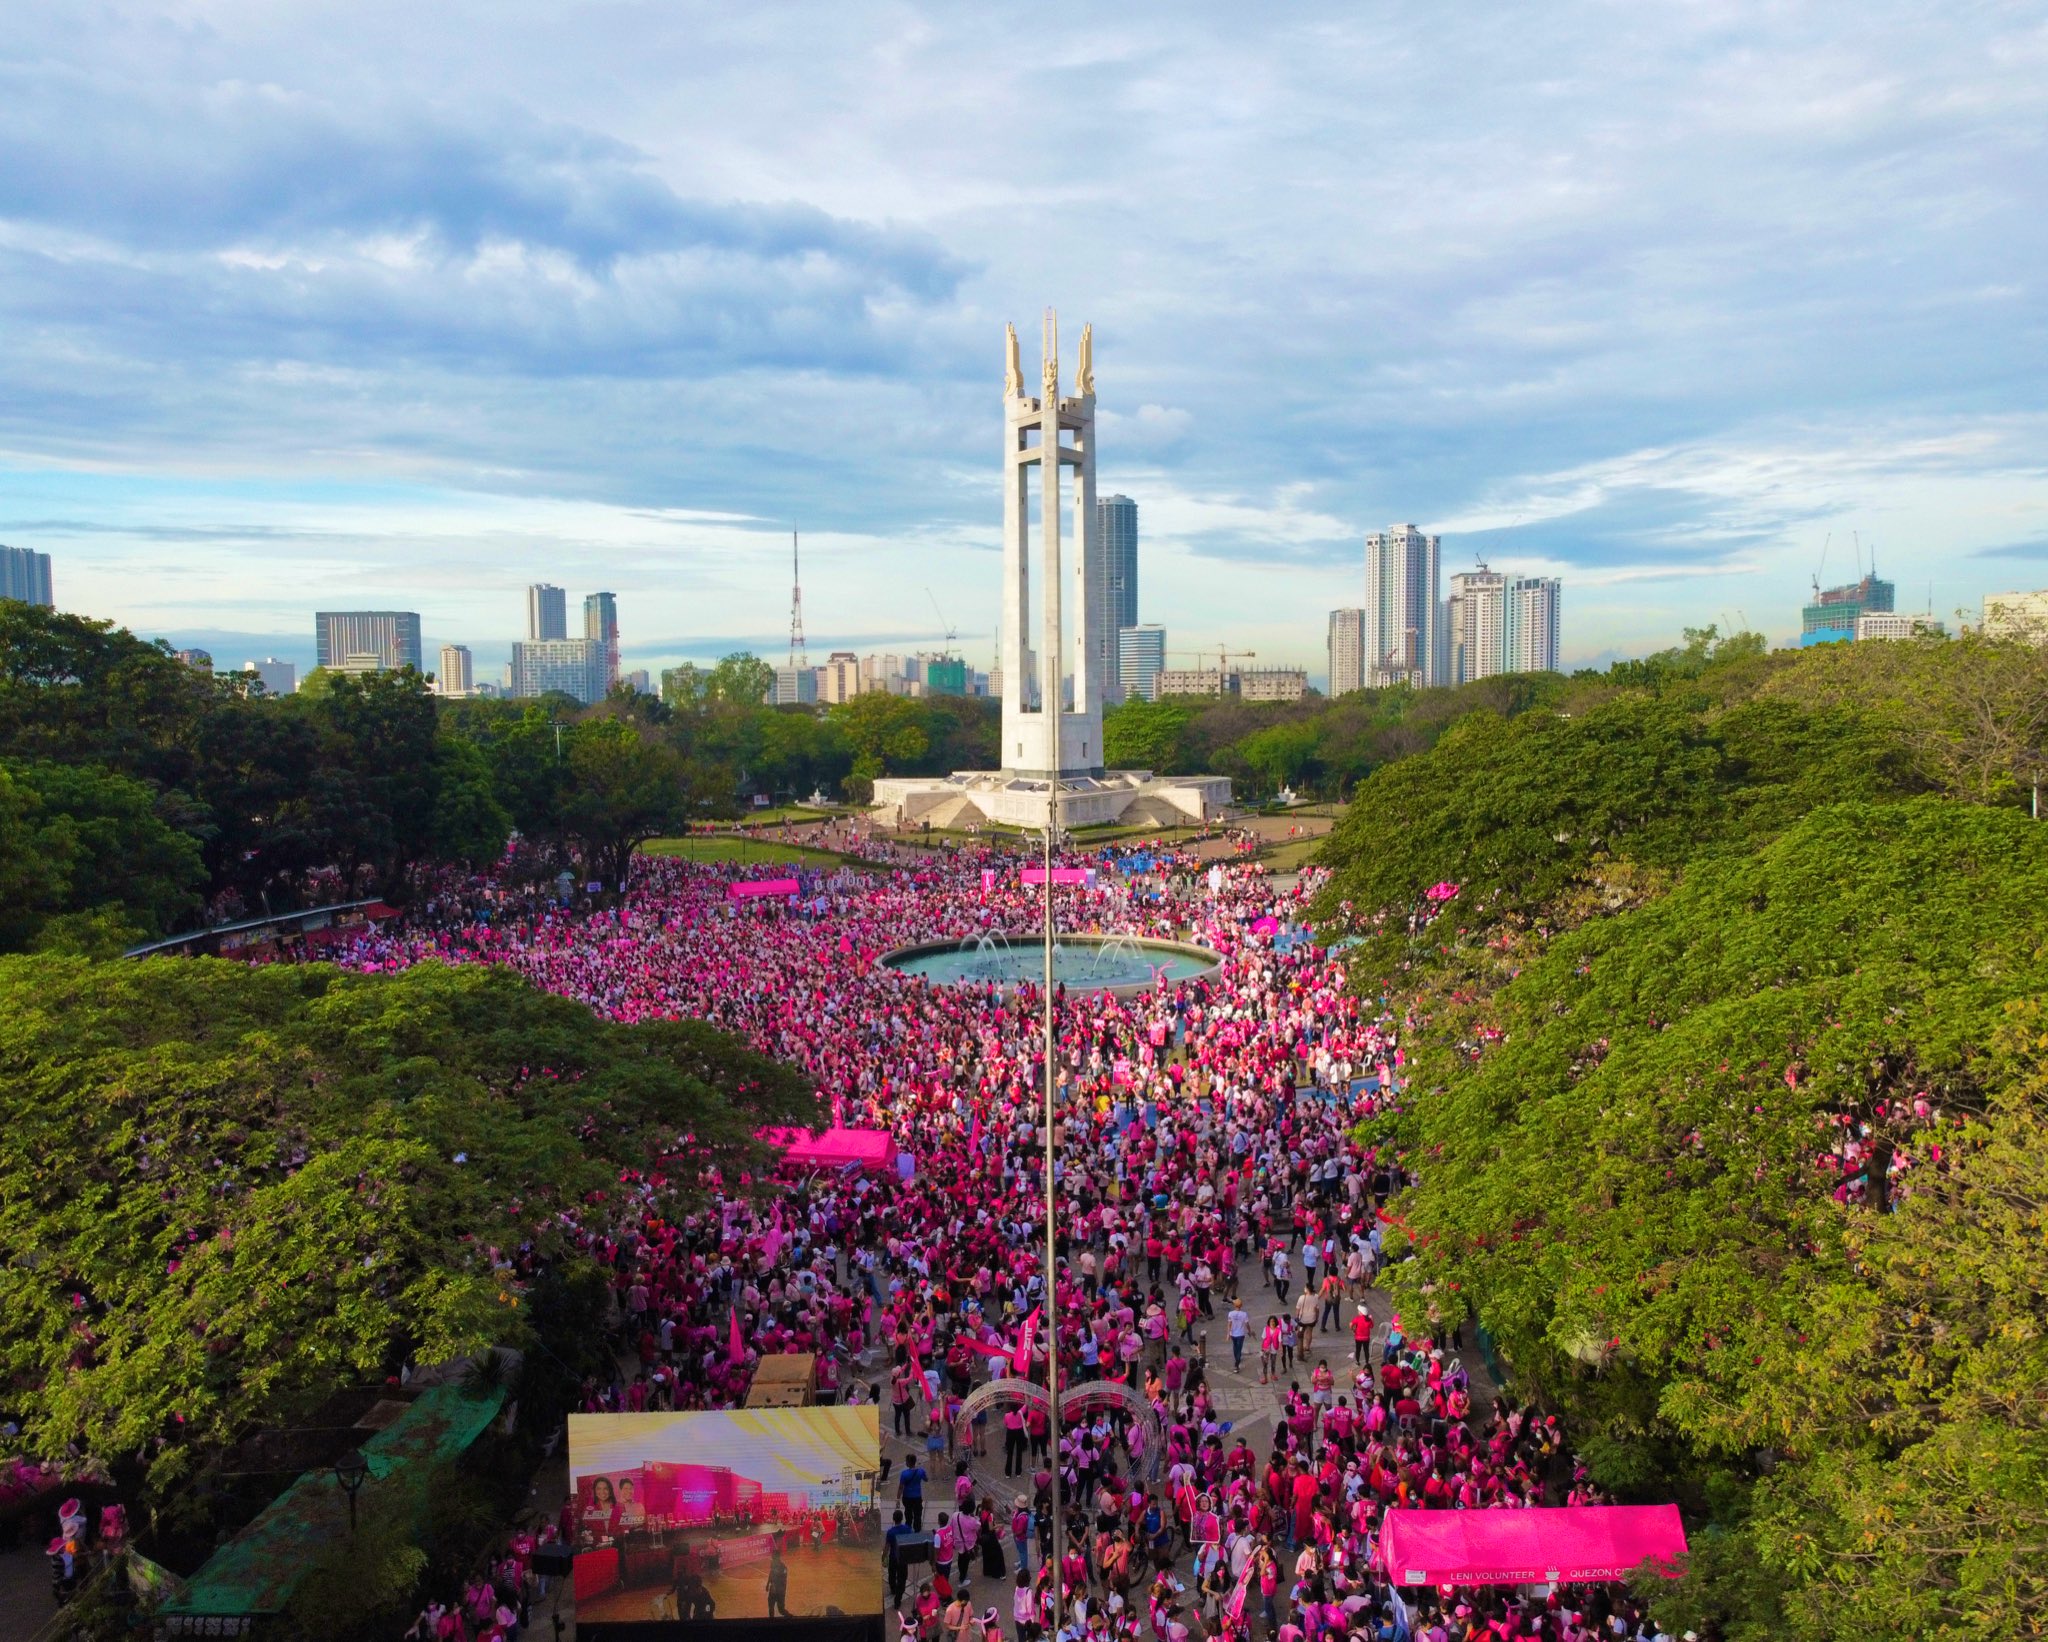 Leni Ribredo supporters QC Memorial Circle was a teeming pink sea of VP Leni Robredo supporters, based on this drone shot. The Robredo camp said more than 20,000 attended the rally. Photo courtesy of Jonas Sergio